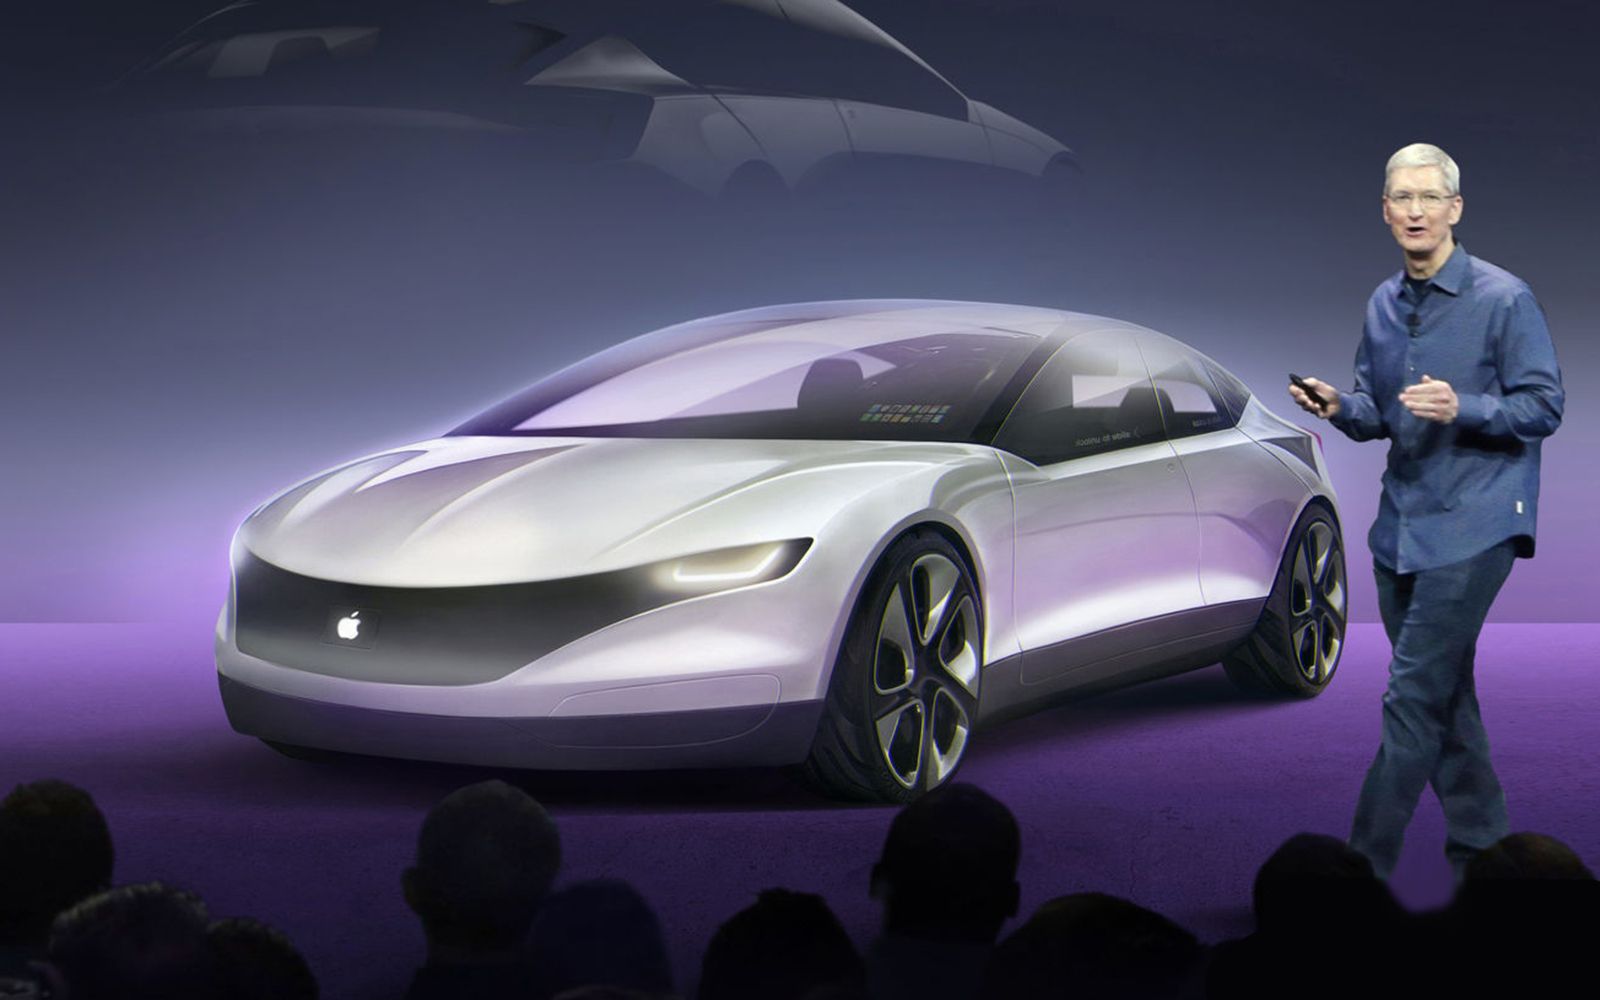 apple car to hit roads from 2020 says tesla’s elon musk but no google car image 1